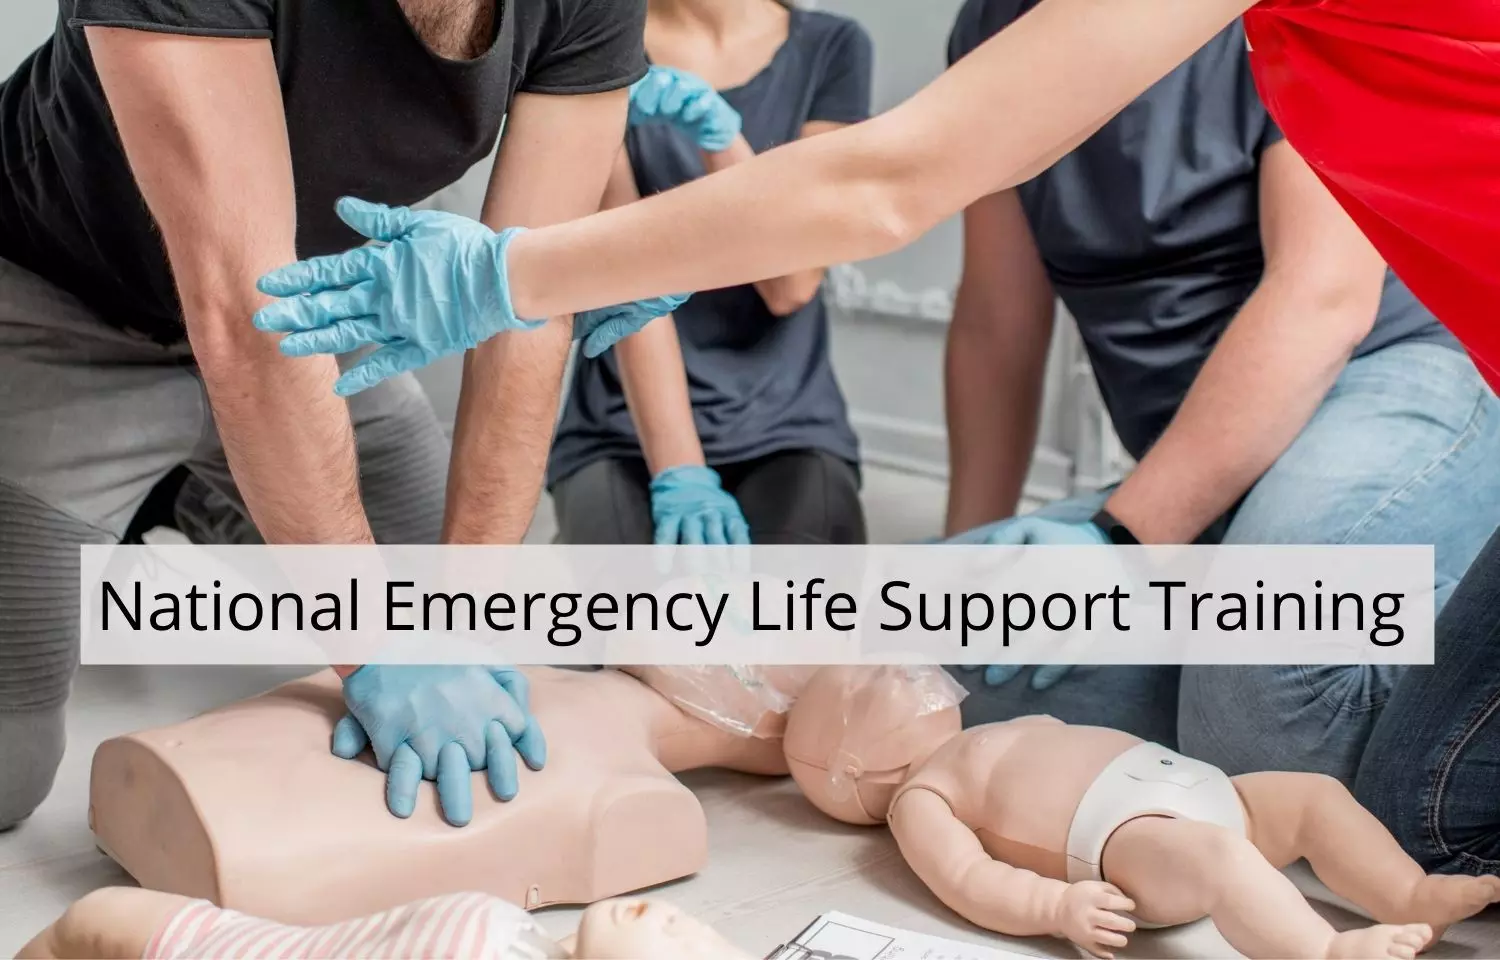 MoS Health launches National Emergency Life Support course for doctors, nurses, paramedics